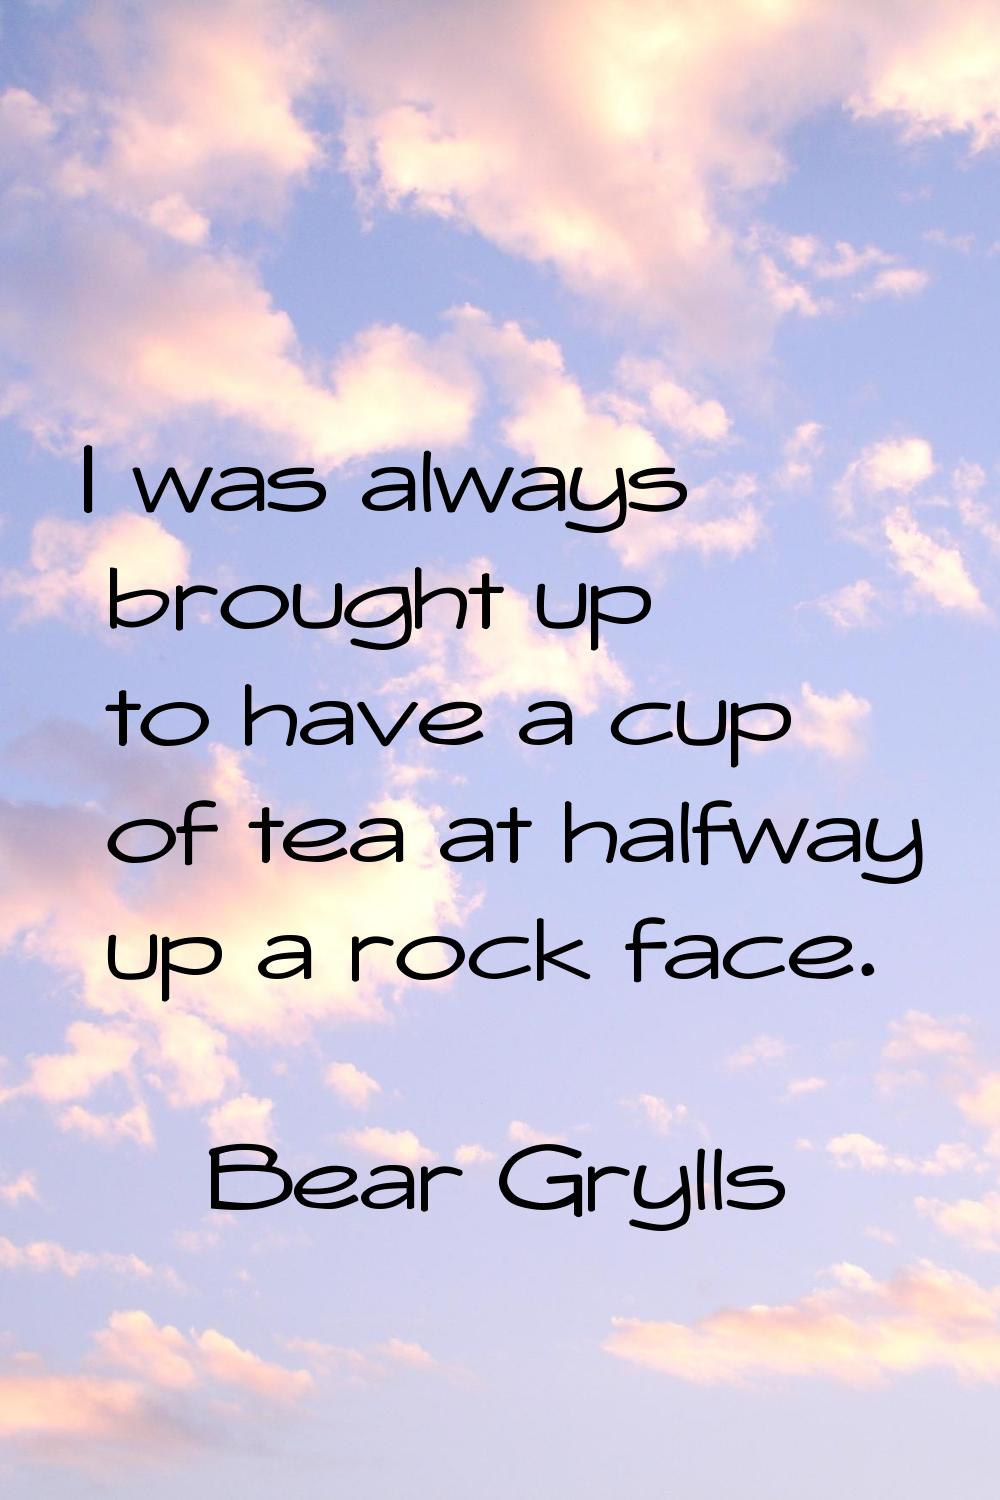 I was always brought up to have a cup of tea at halfway up a rock face.